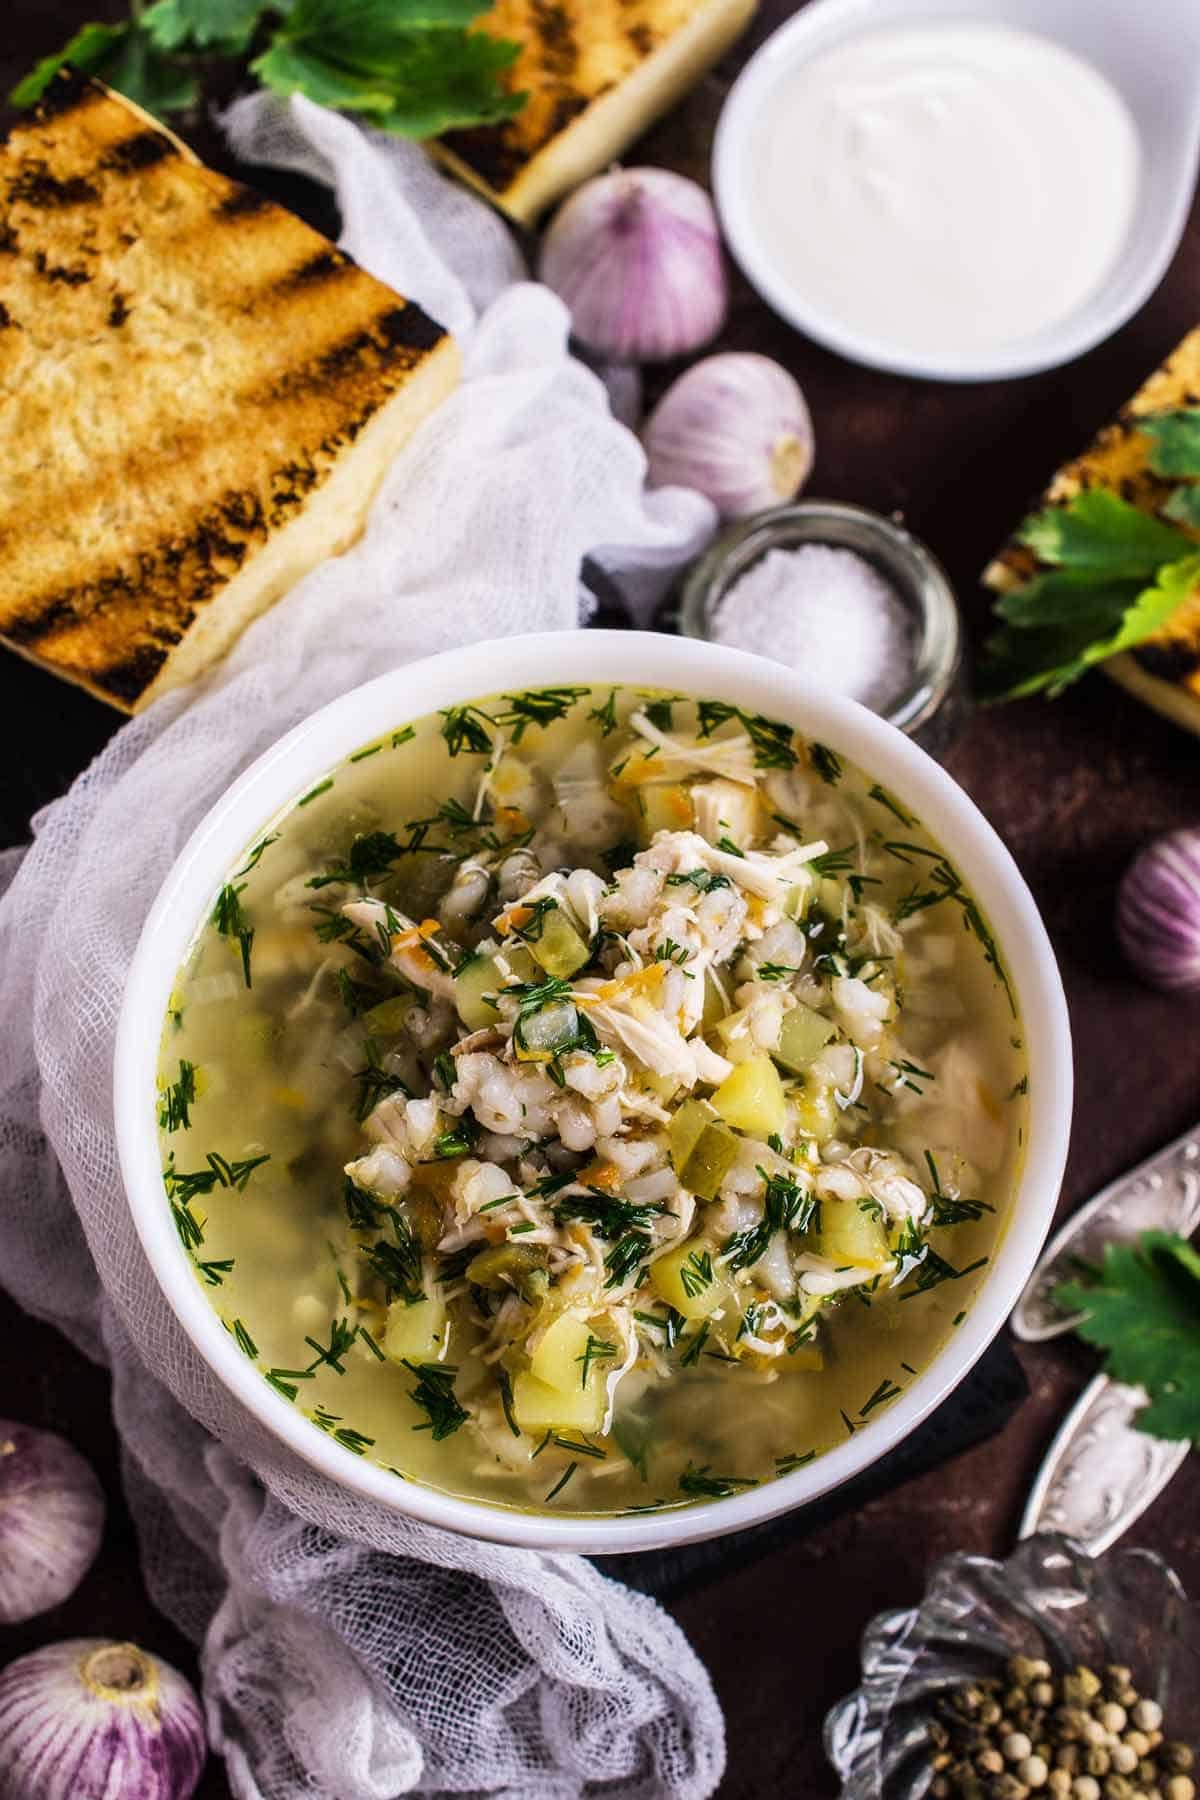 Bowl of turkey soup with side of bread.